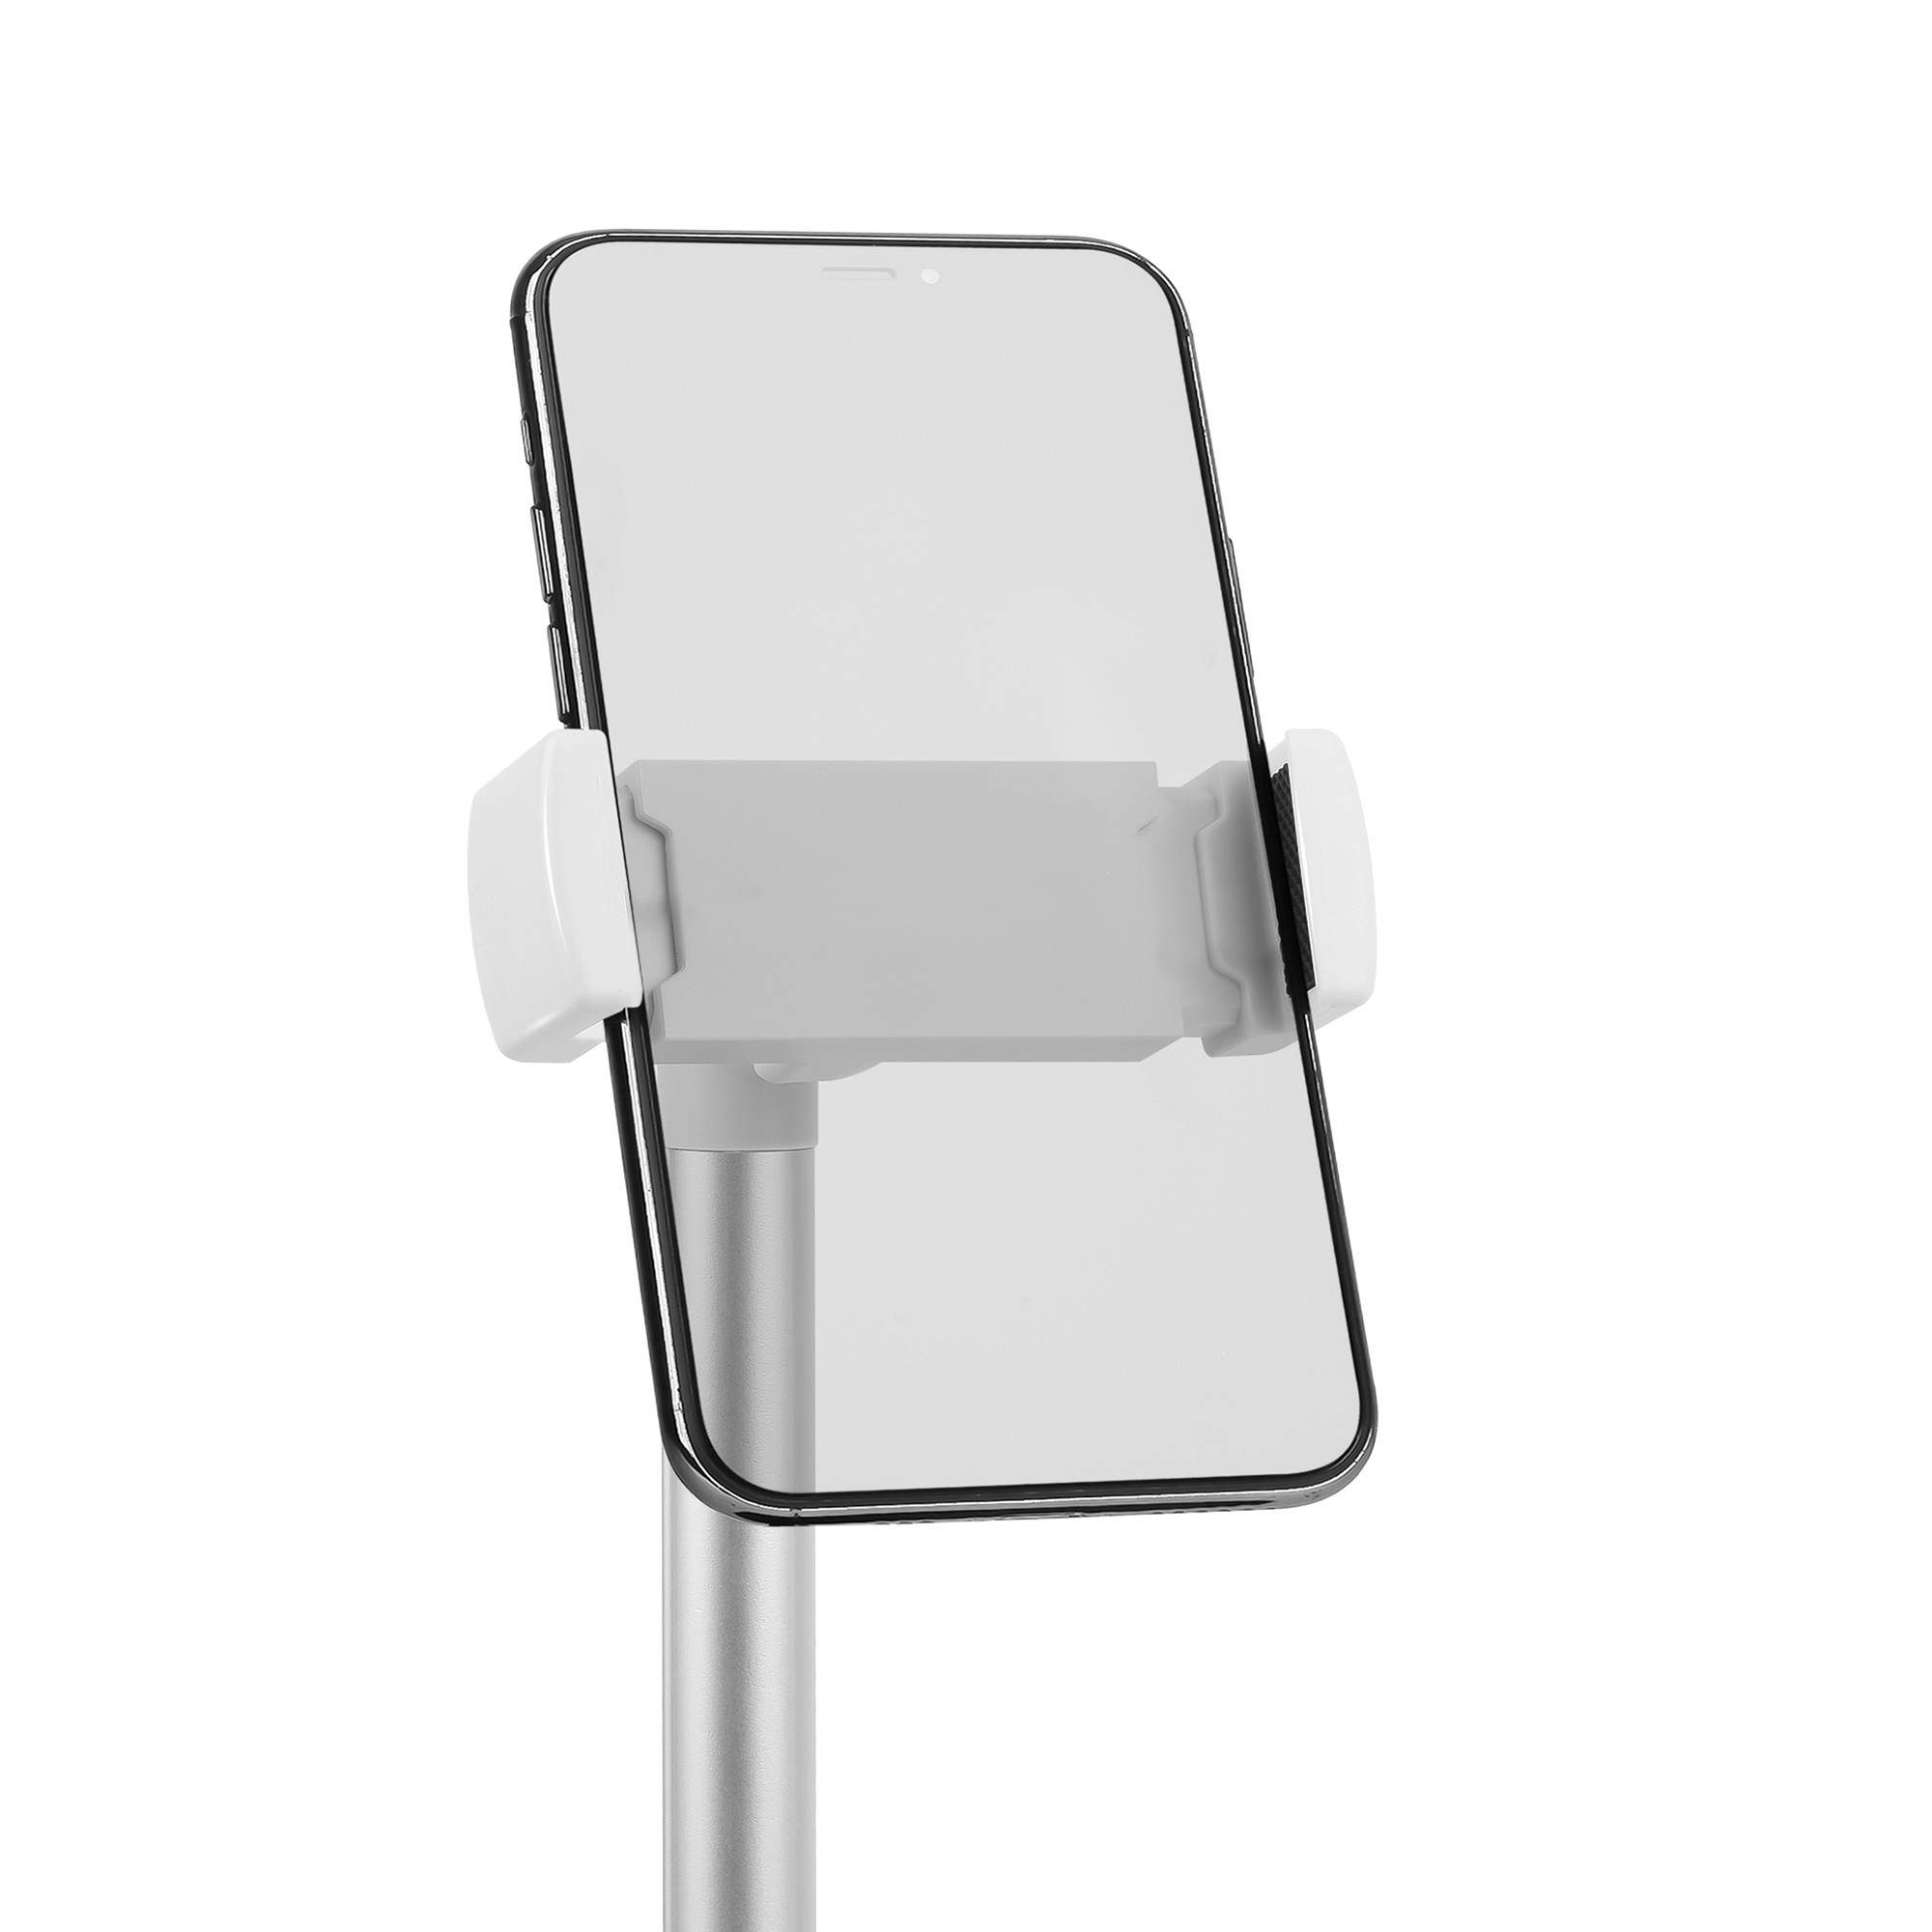 Cooper ChatStand Cell Phone Stand for Desk with Height Adjustable, Rotating Holder